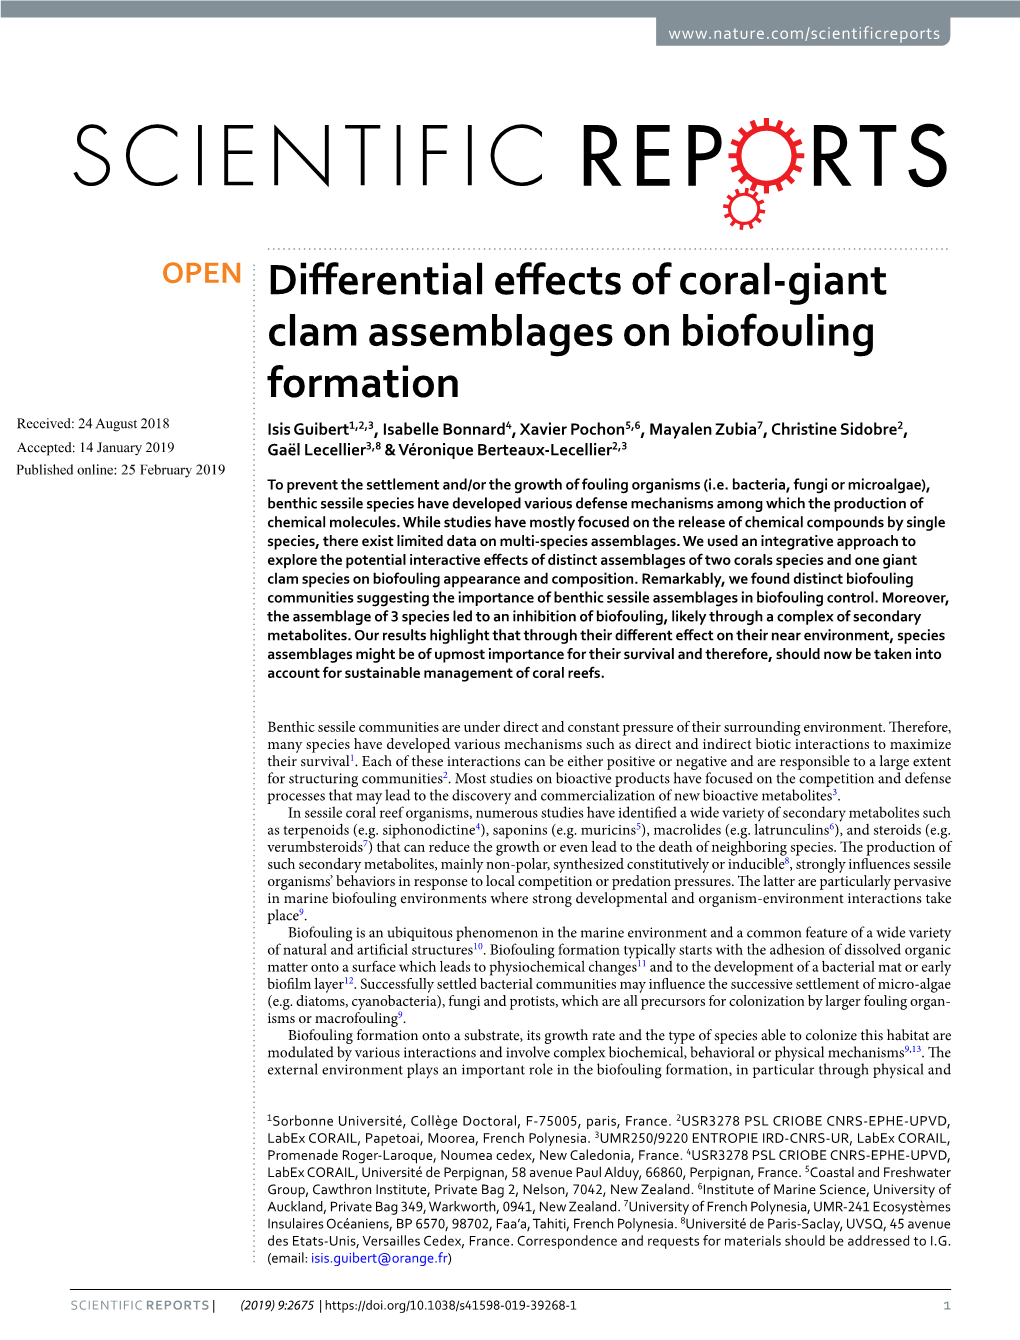 Differential Effects of Coral-Giant Clam Assemblages on Biofouling Formation